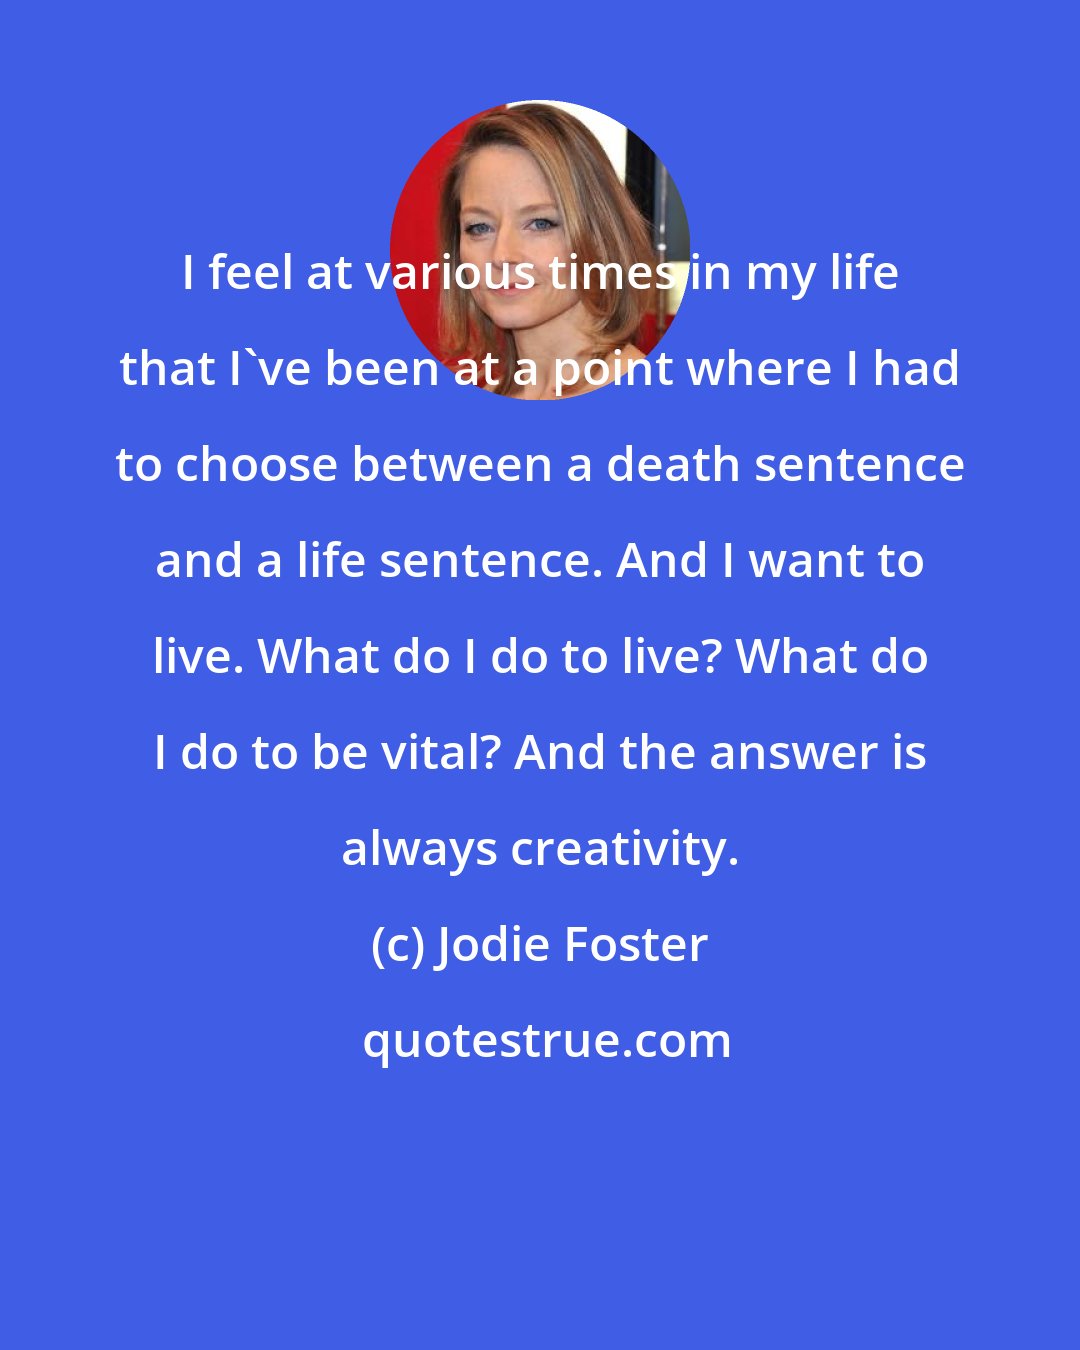 Jodie Foster: I feel at various times in my life that I've been at a point where I had to choose between a death sentence and a life sentence. And I want to live. What do I do to live? What do I do to be vital? And the answer is always creativity.